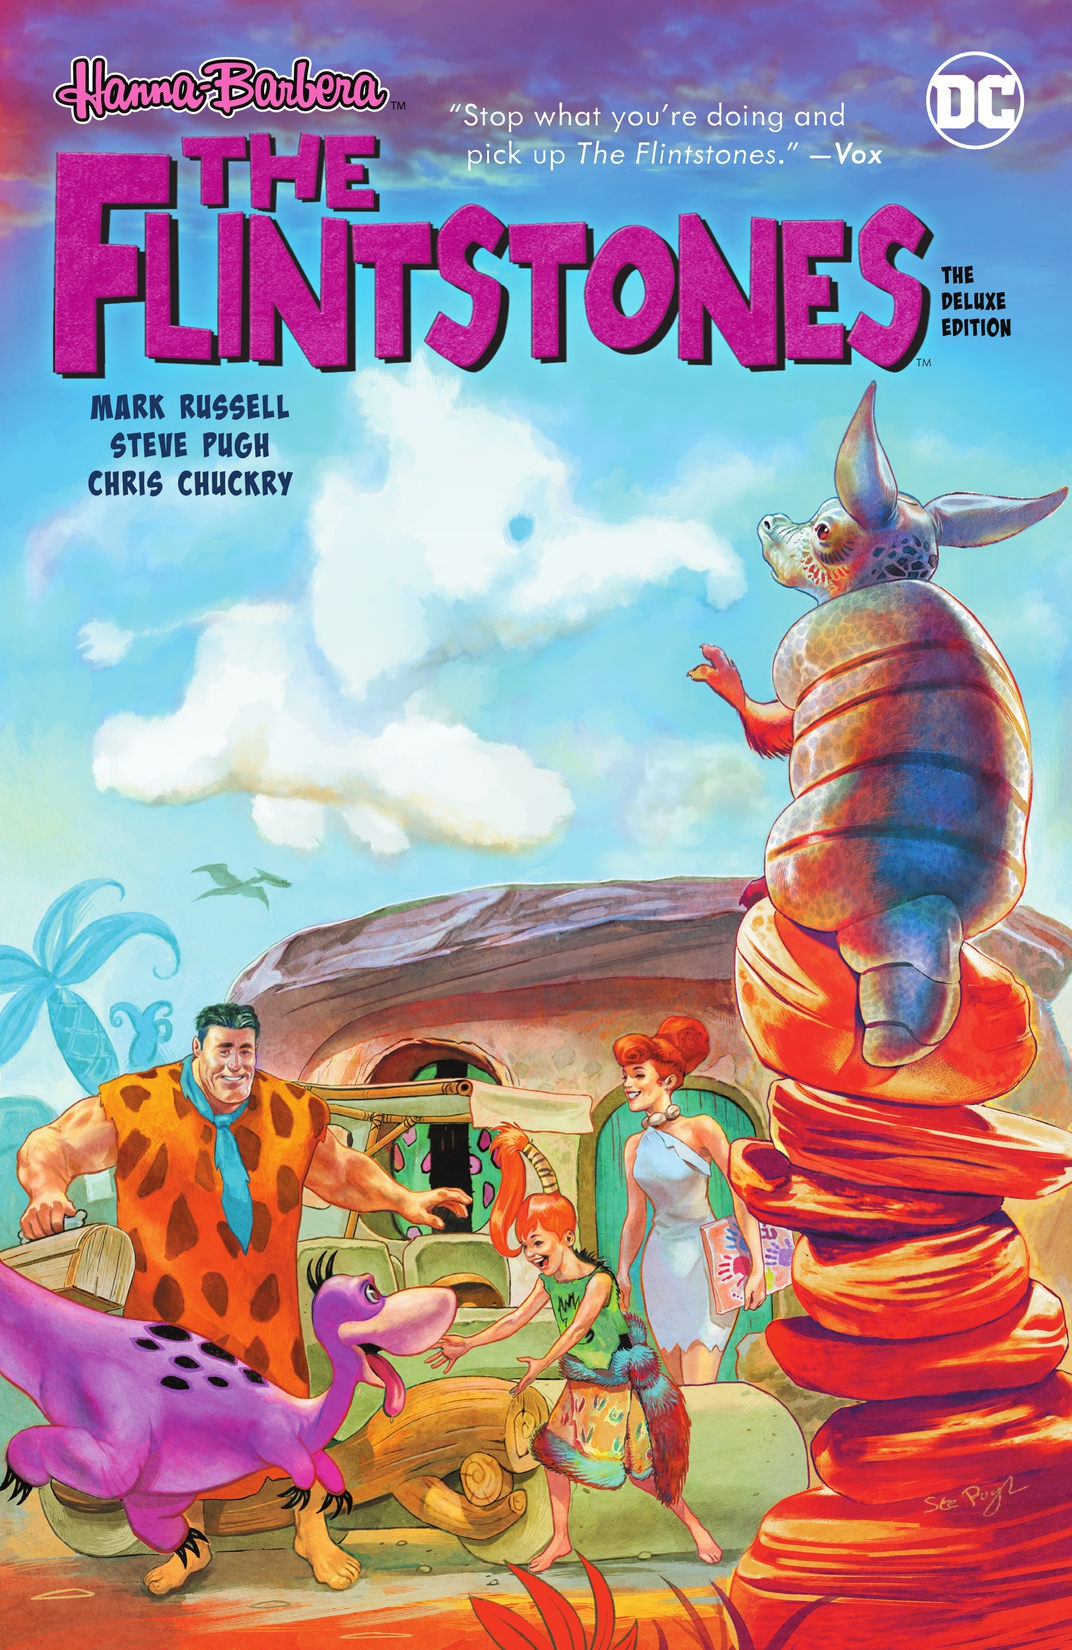 The Flintstones The Deluxe Edition preview images